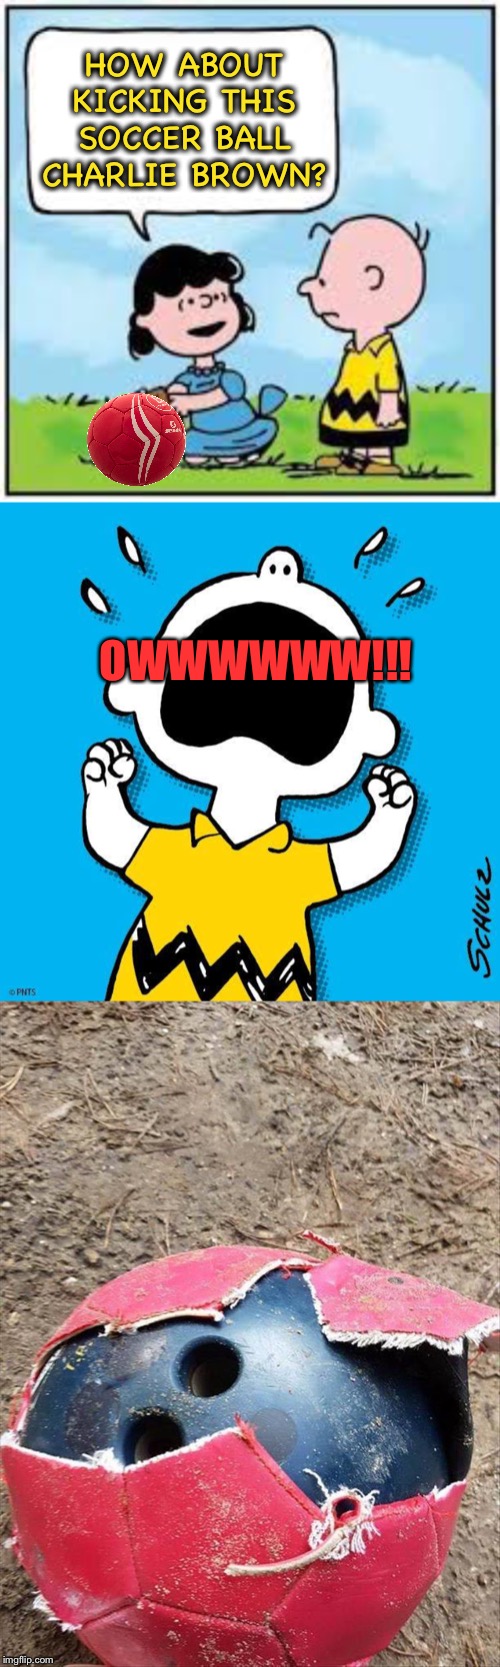 Chuck will never learn. | HOW ABOUT KICKING THIS SOCCER BALL CHARLIE BROWN? OWWWWWW!!! | image tagged in charlie brown,fool me once,memes,funny | made w/ Imgflip meme maker